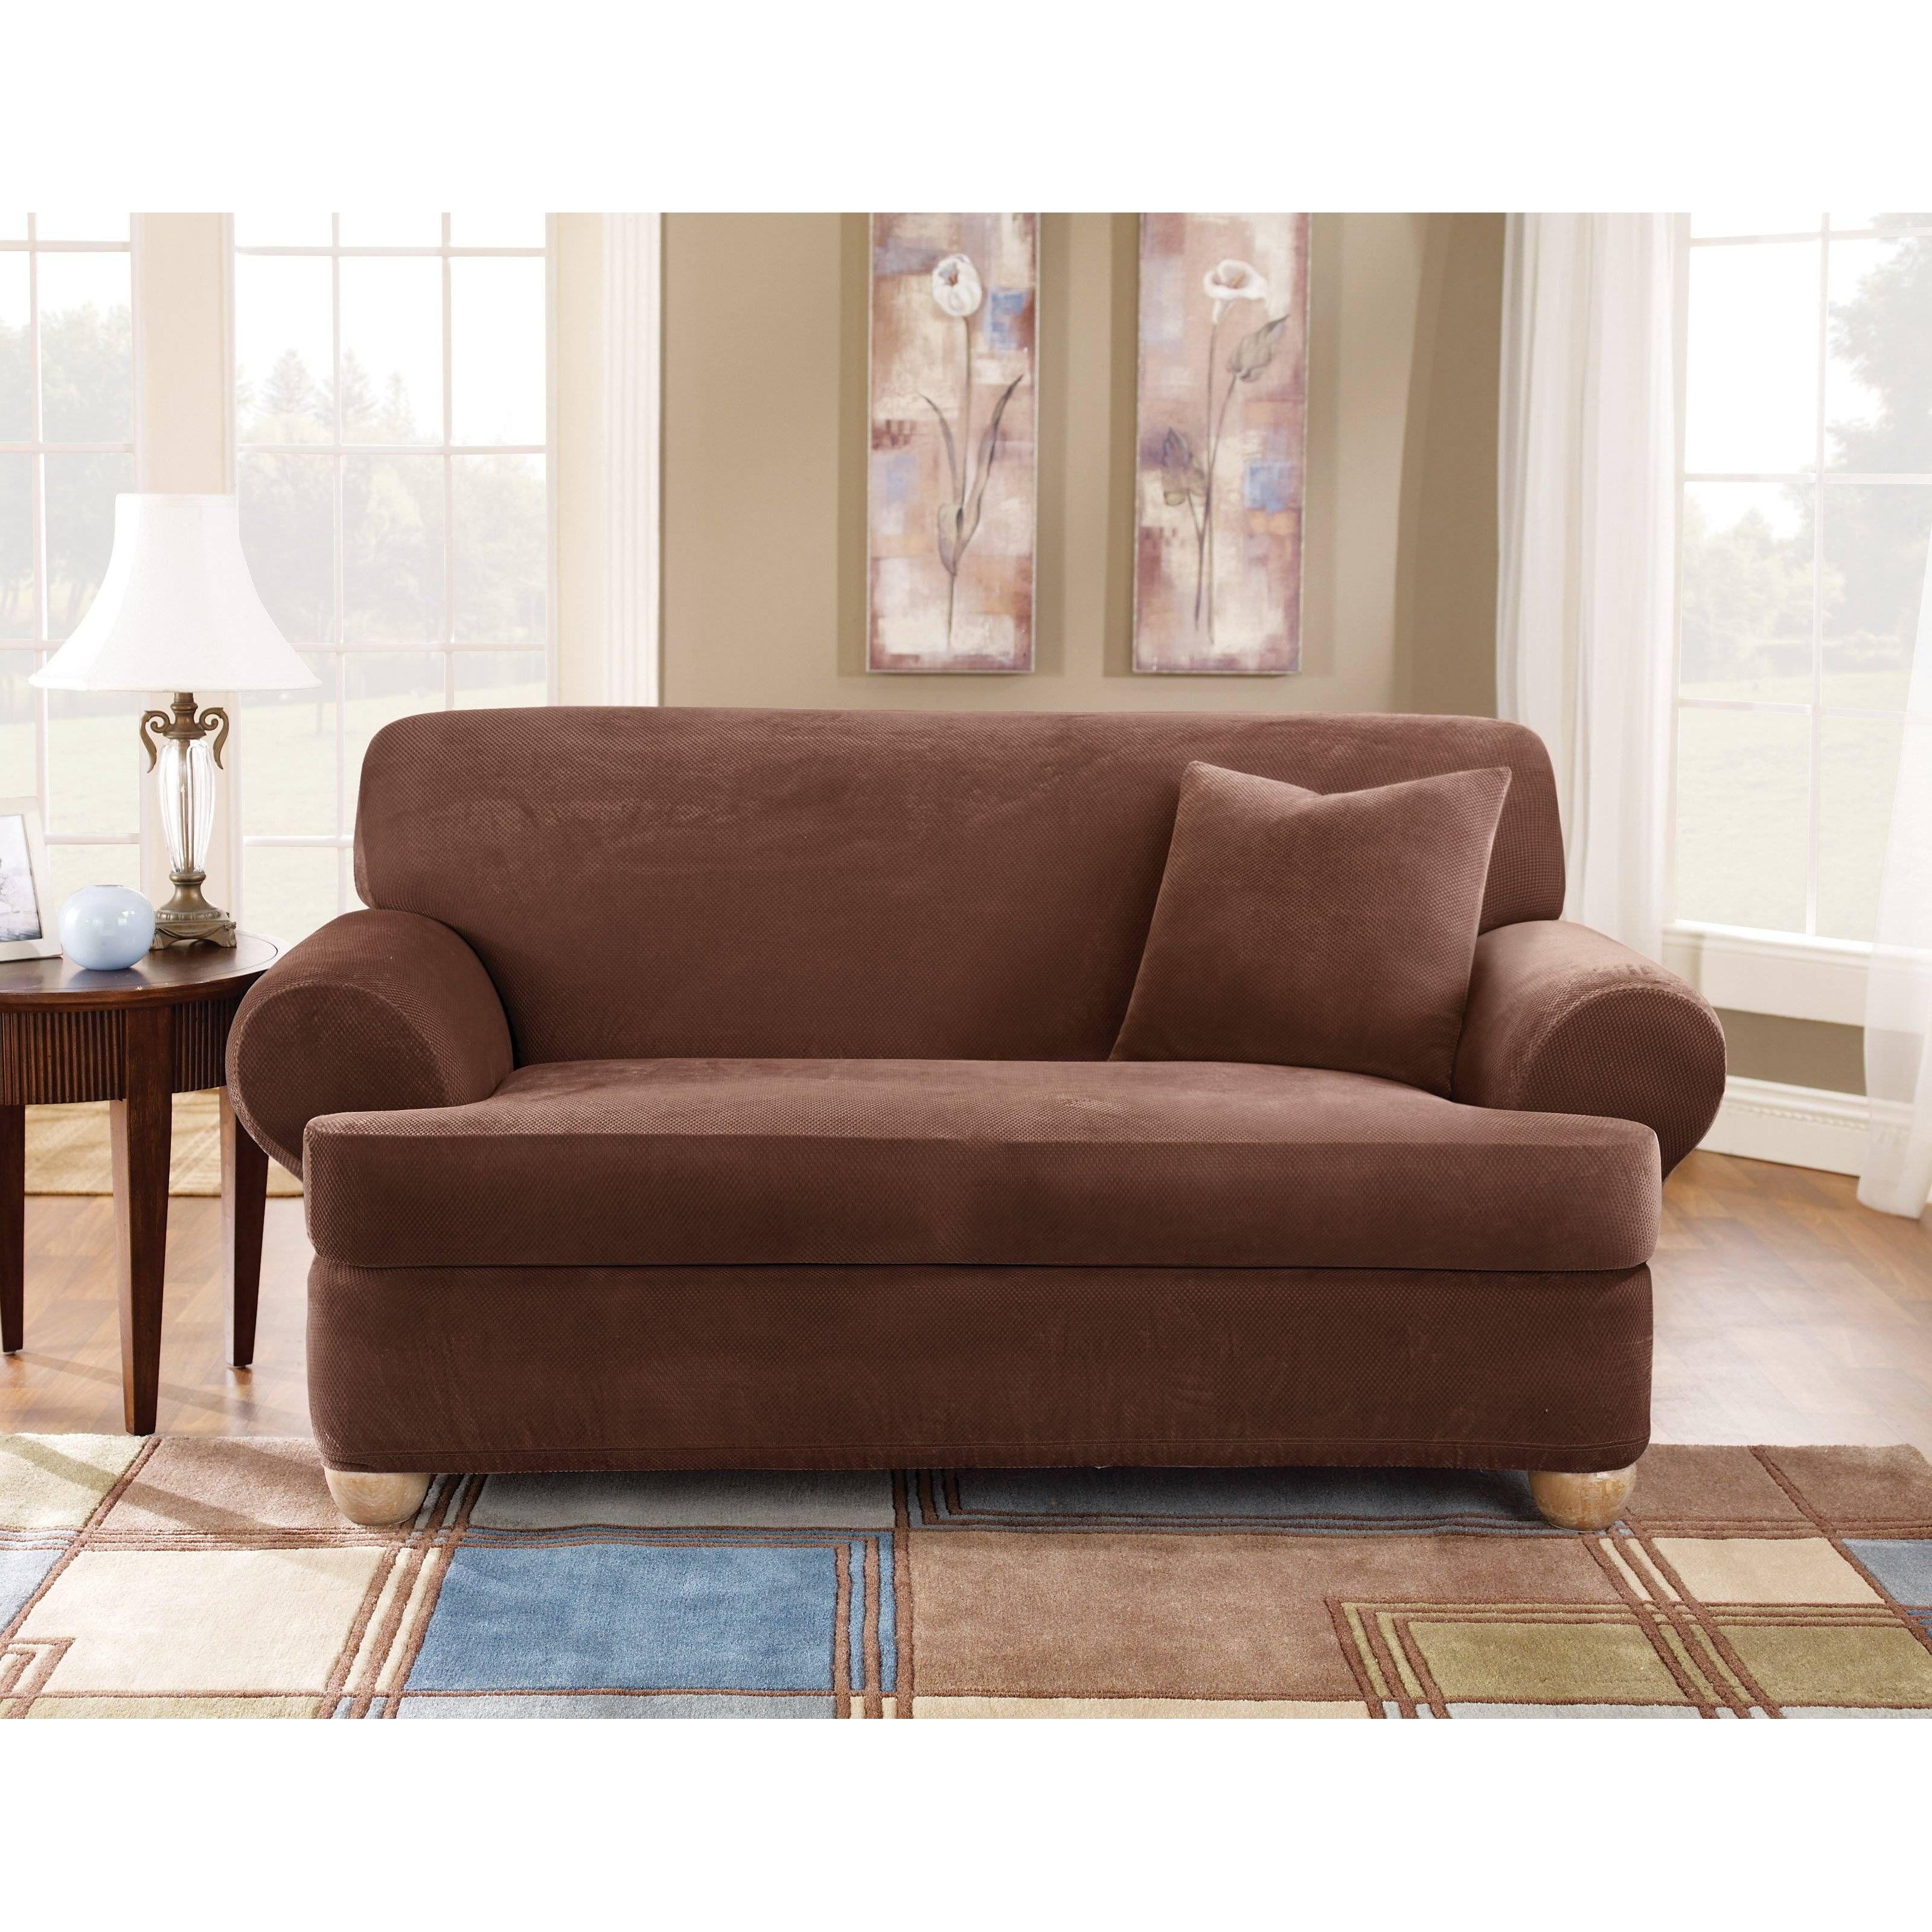 Sure Fit Stretch Pique T Cushion Three Piece Sofa Slipcover Pertaining To Walmart Slipcovers For Sofas (Photo 16 of 30)